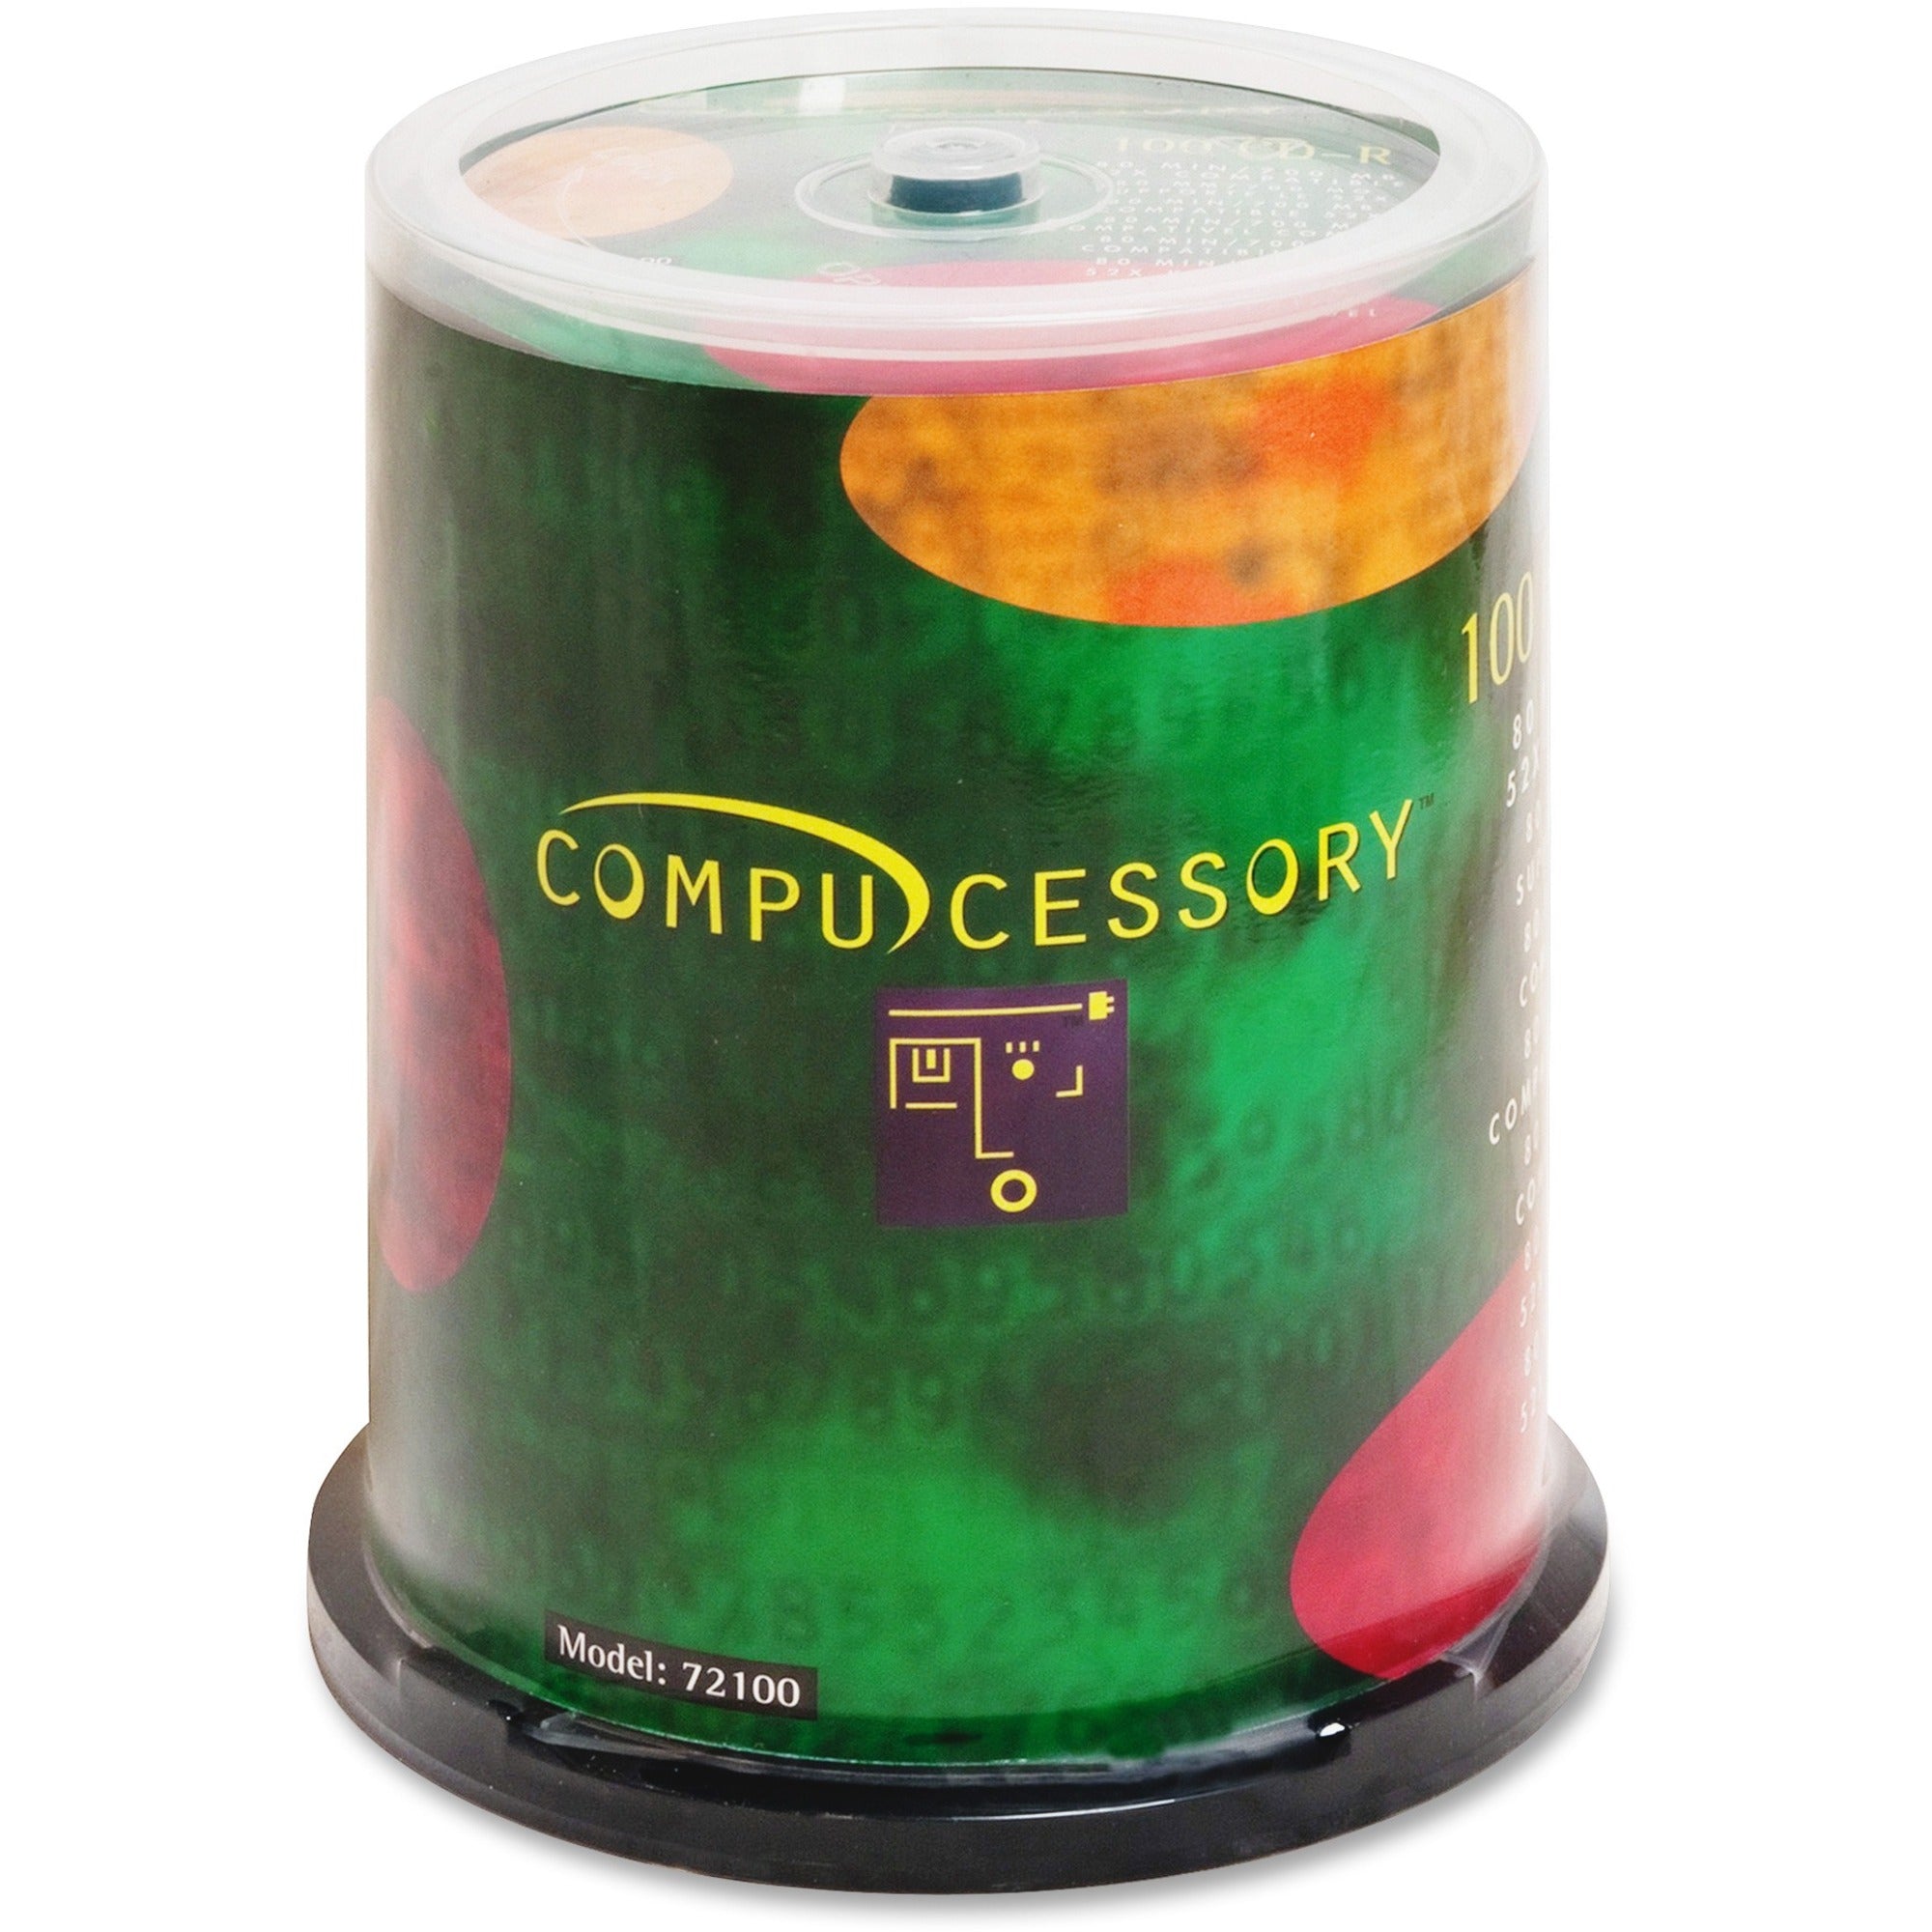 Compucessory CD Recordable Media - CD-R - 52x - 700 MB - 100 Pack Spindle - 120mm - 1.33 Hour Maximum Recording Time - 